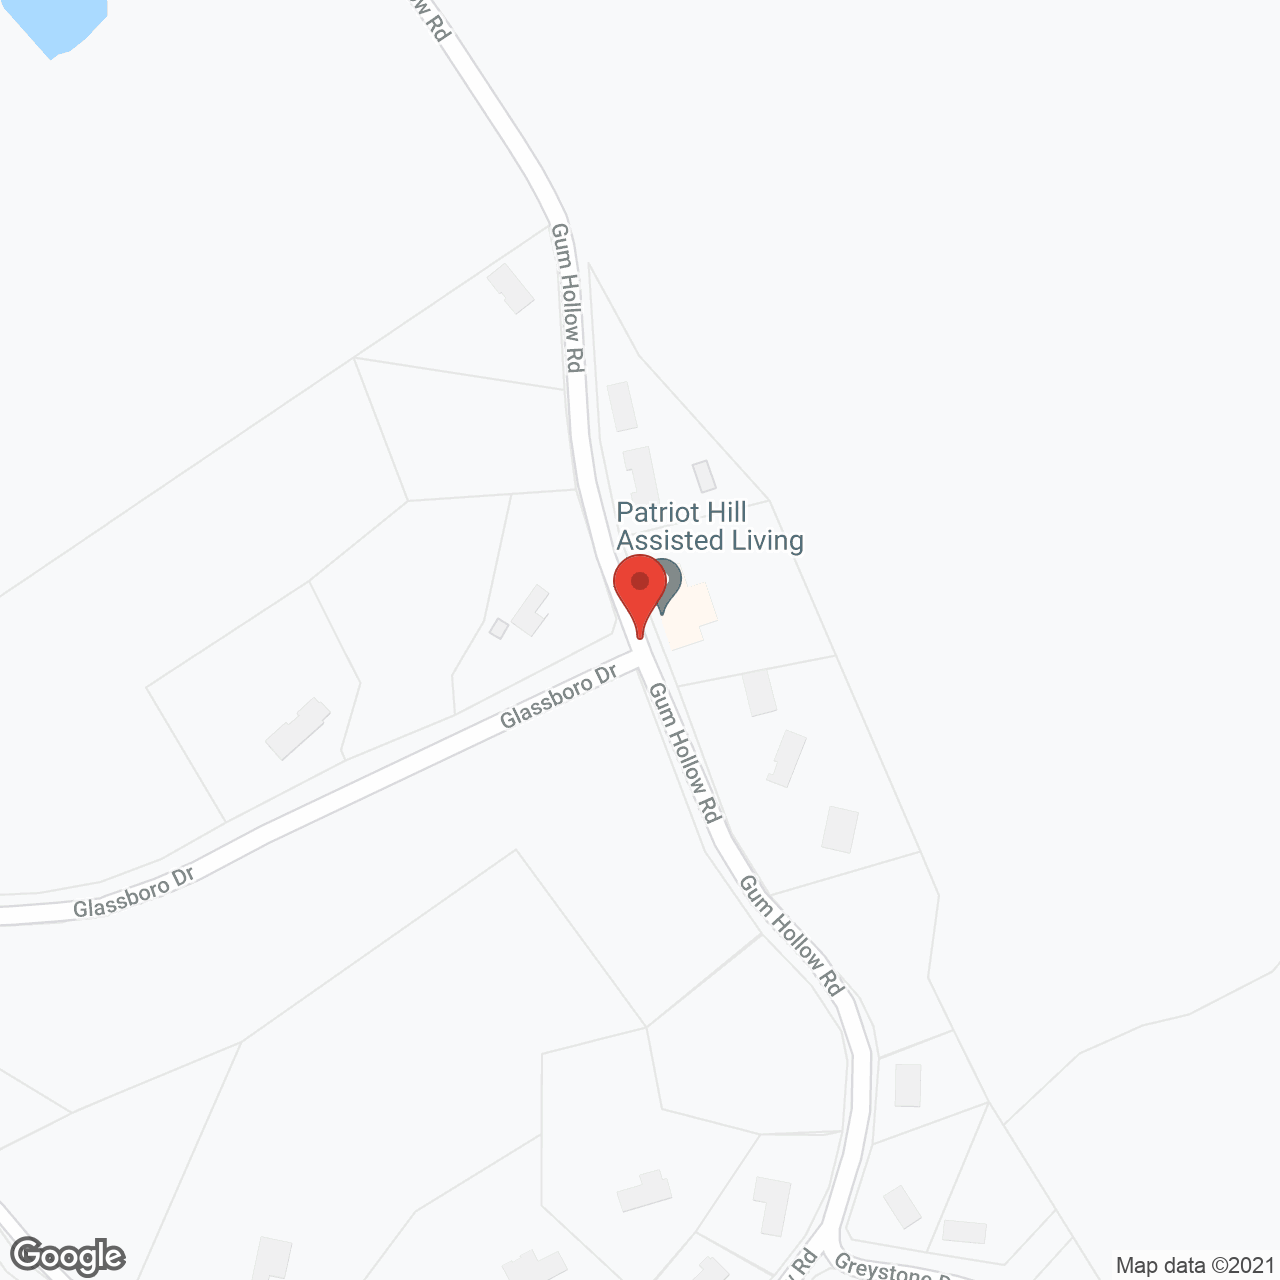 Patriot Hills Assisted Living Facility in google map